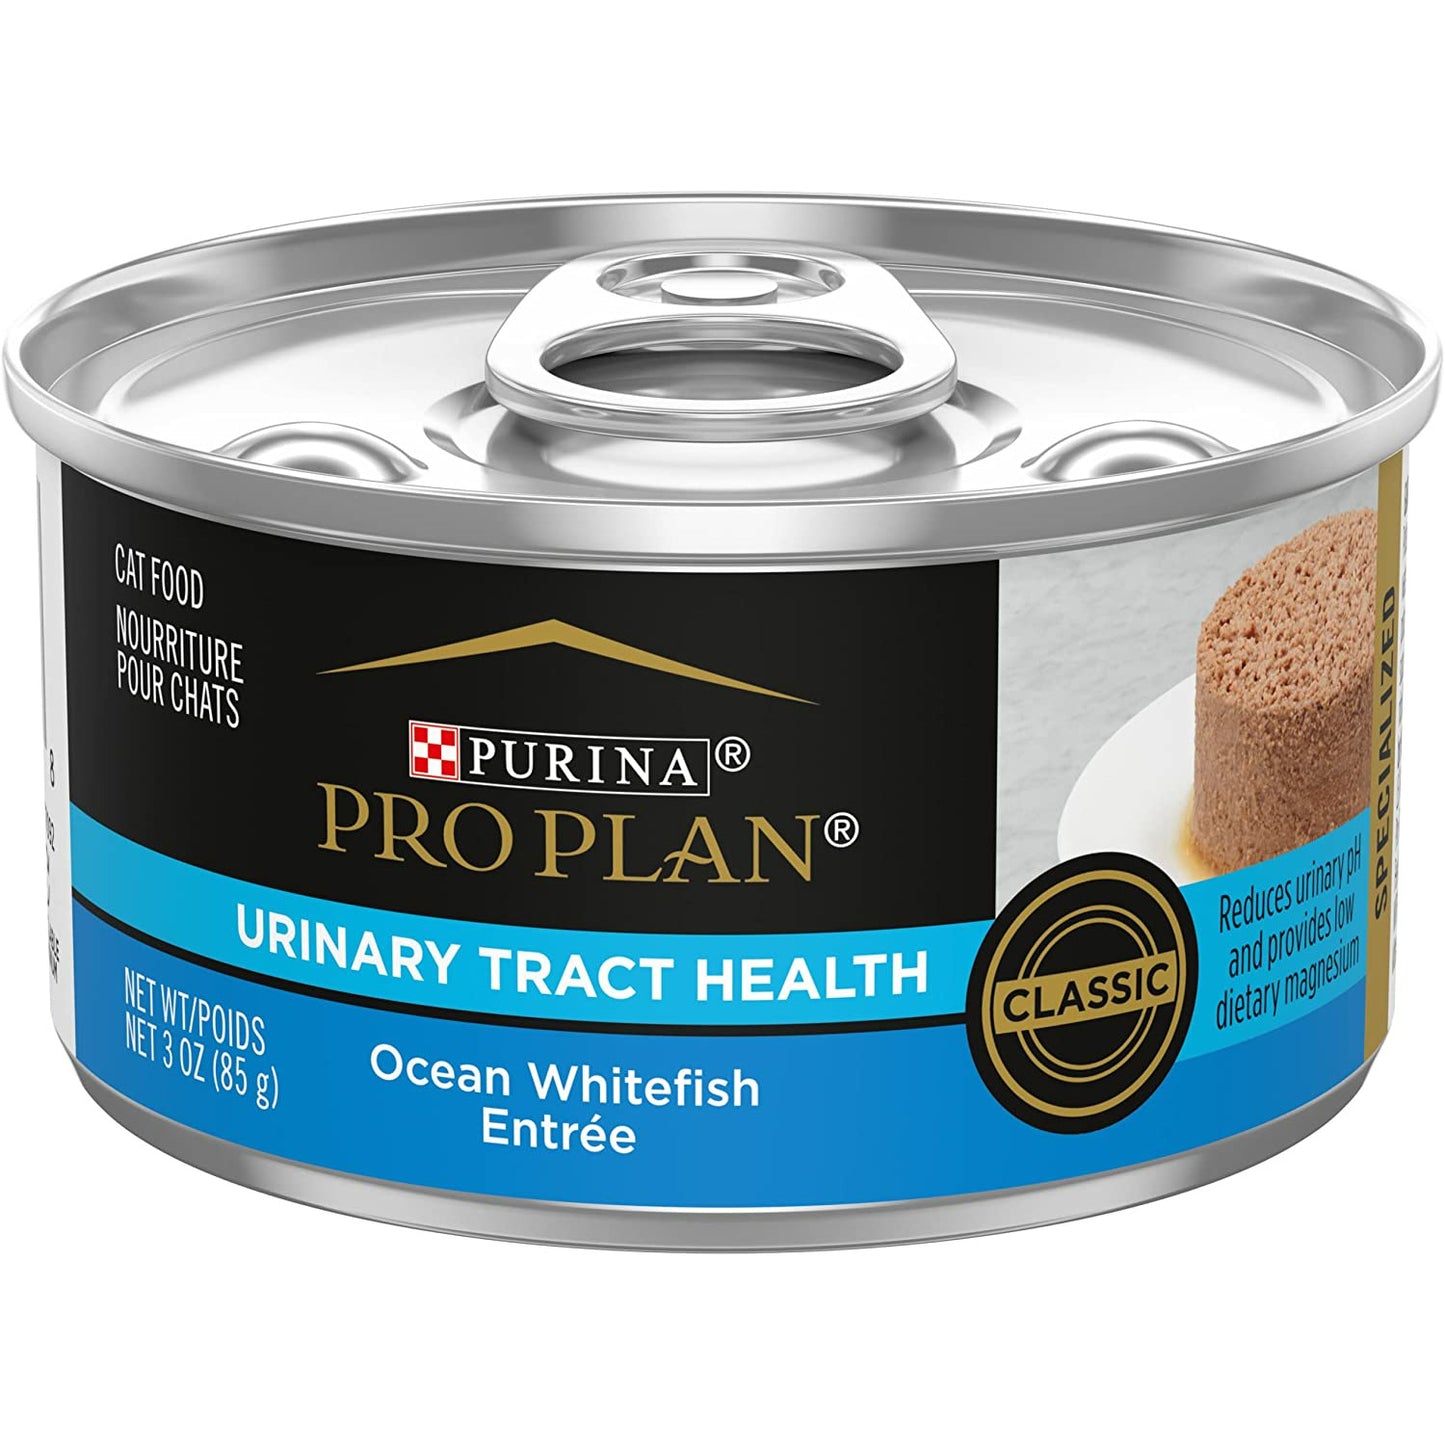 Purina Pro Plan Adult Urinary Tract Health Formula Ocean Whitefish Entrée Wet Cat Food 85g Canned Cat Food 85g | PetMax Canada